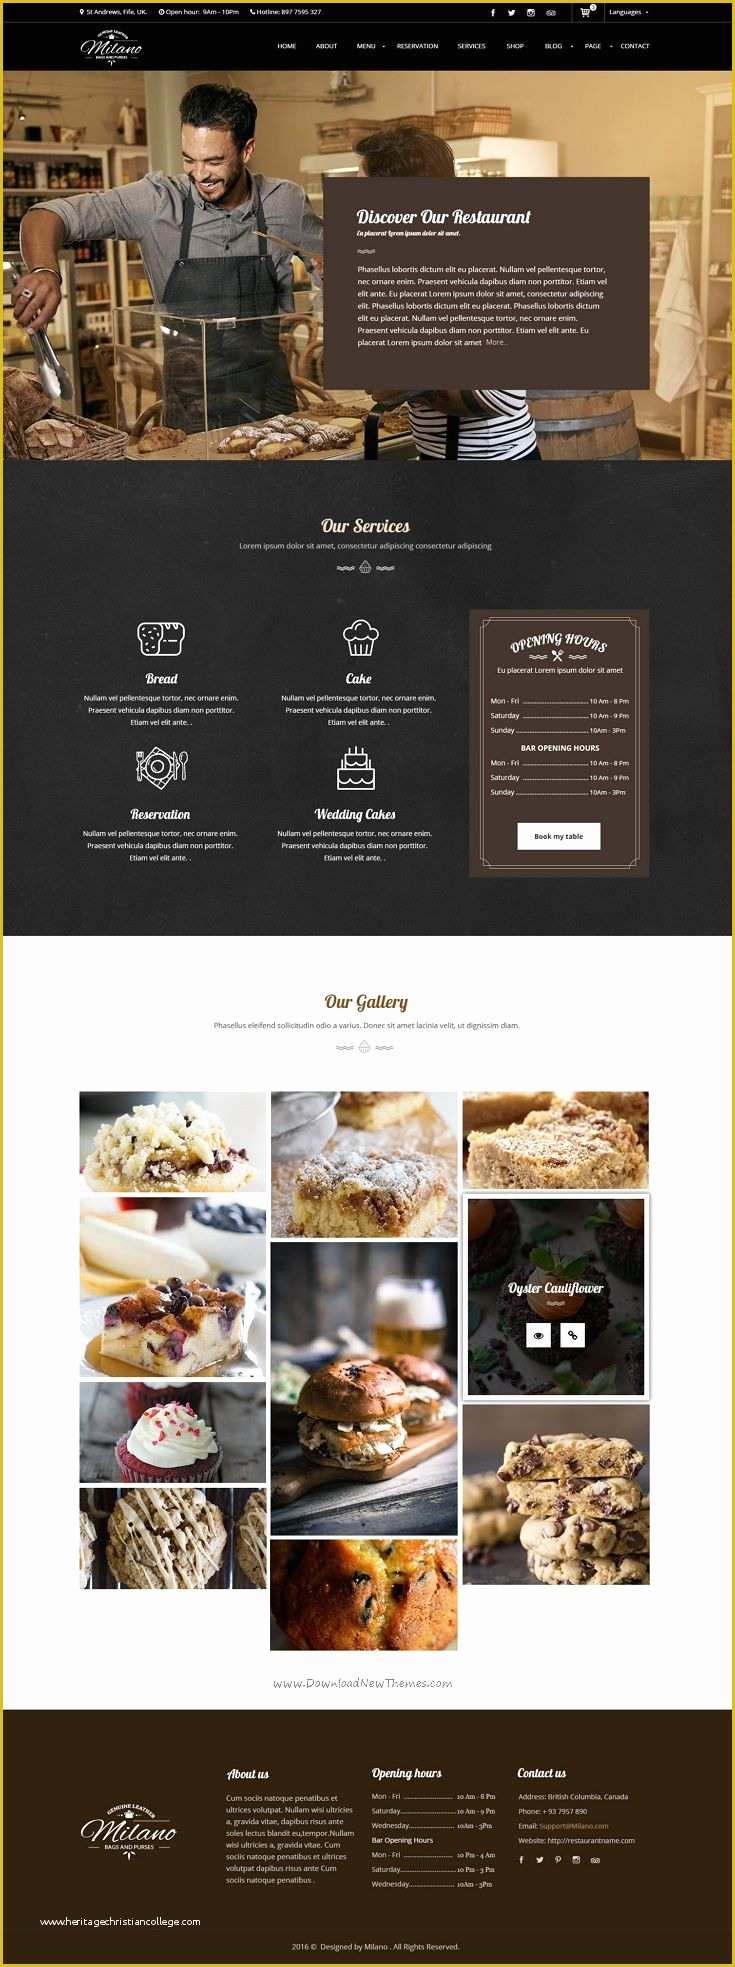 Coffee Shop Website Template Free Download Of 1000 Ideas About Bakery Shop Design On Pinterest